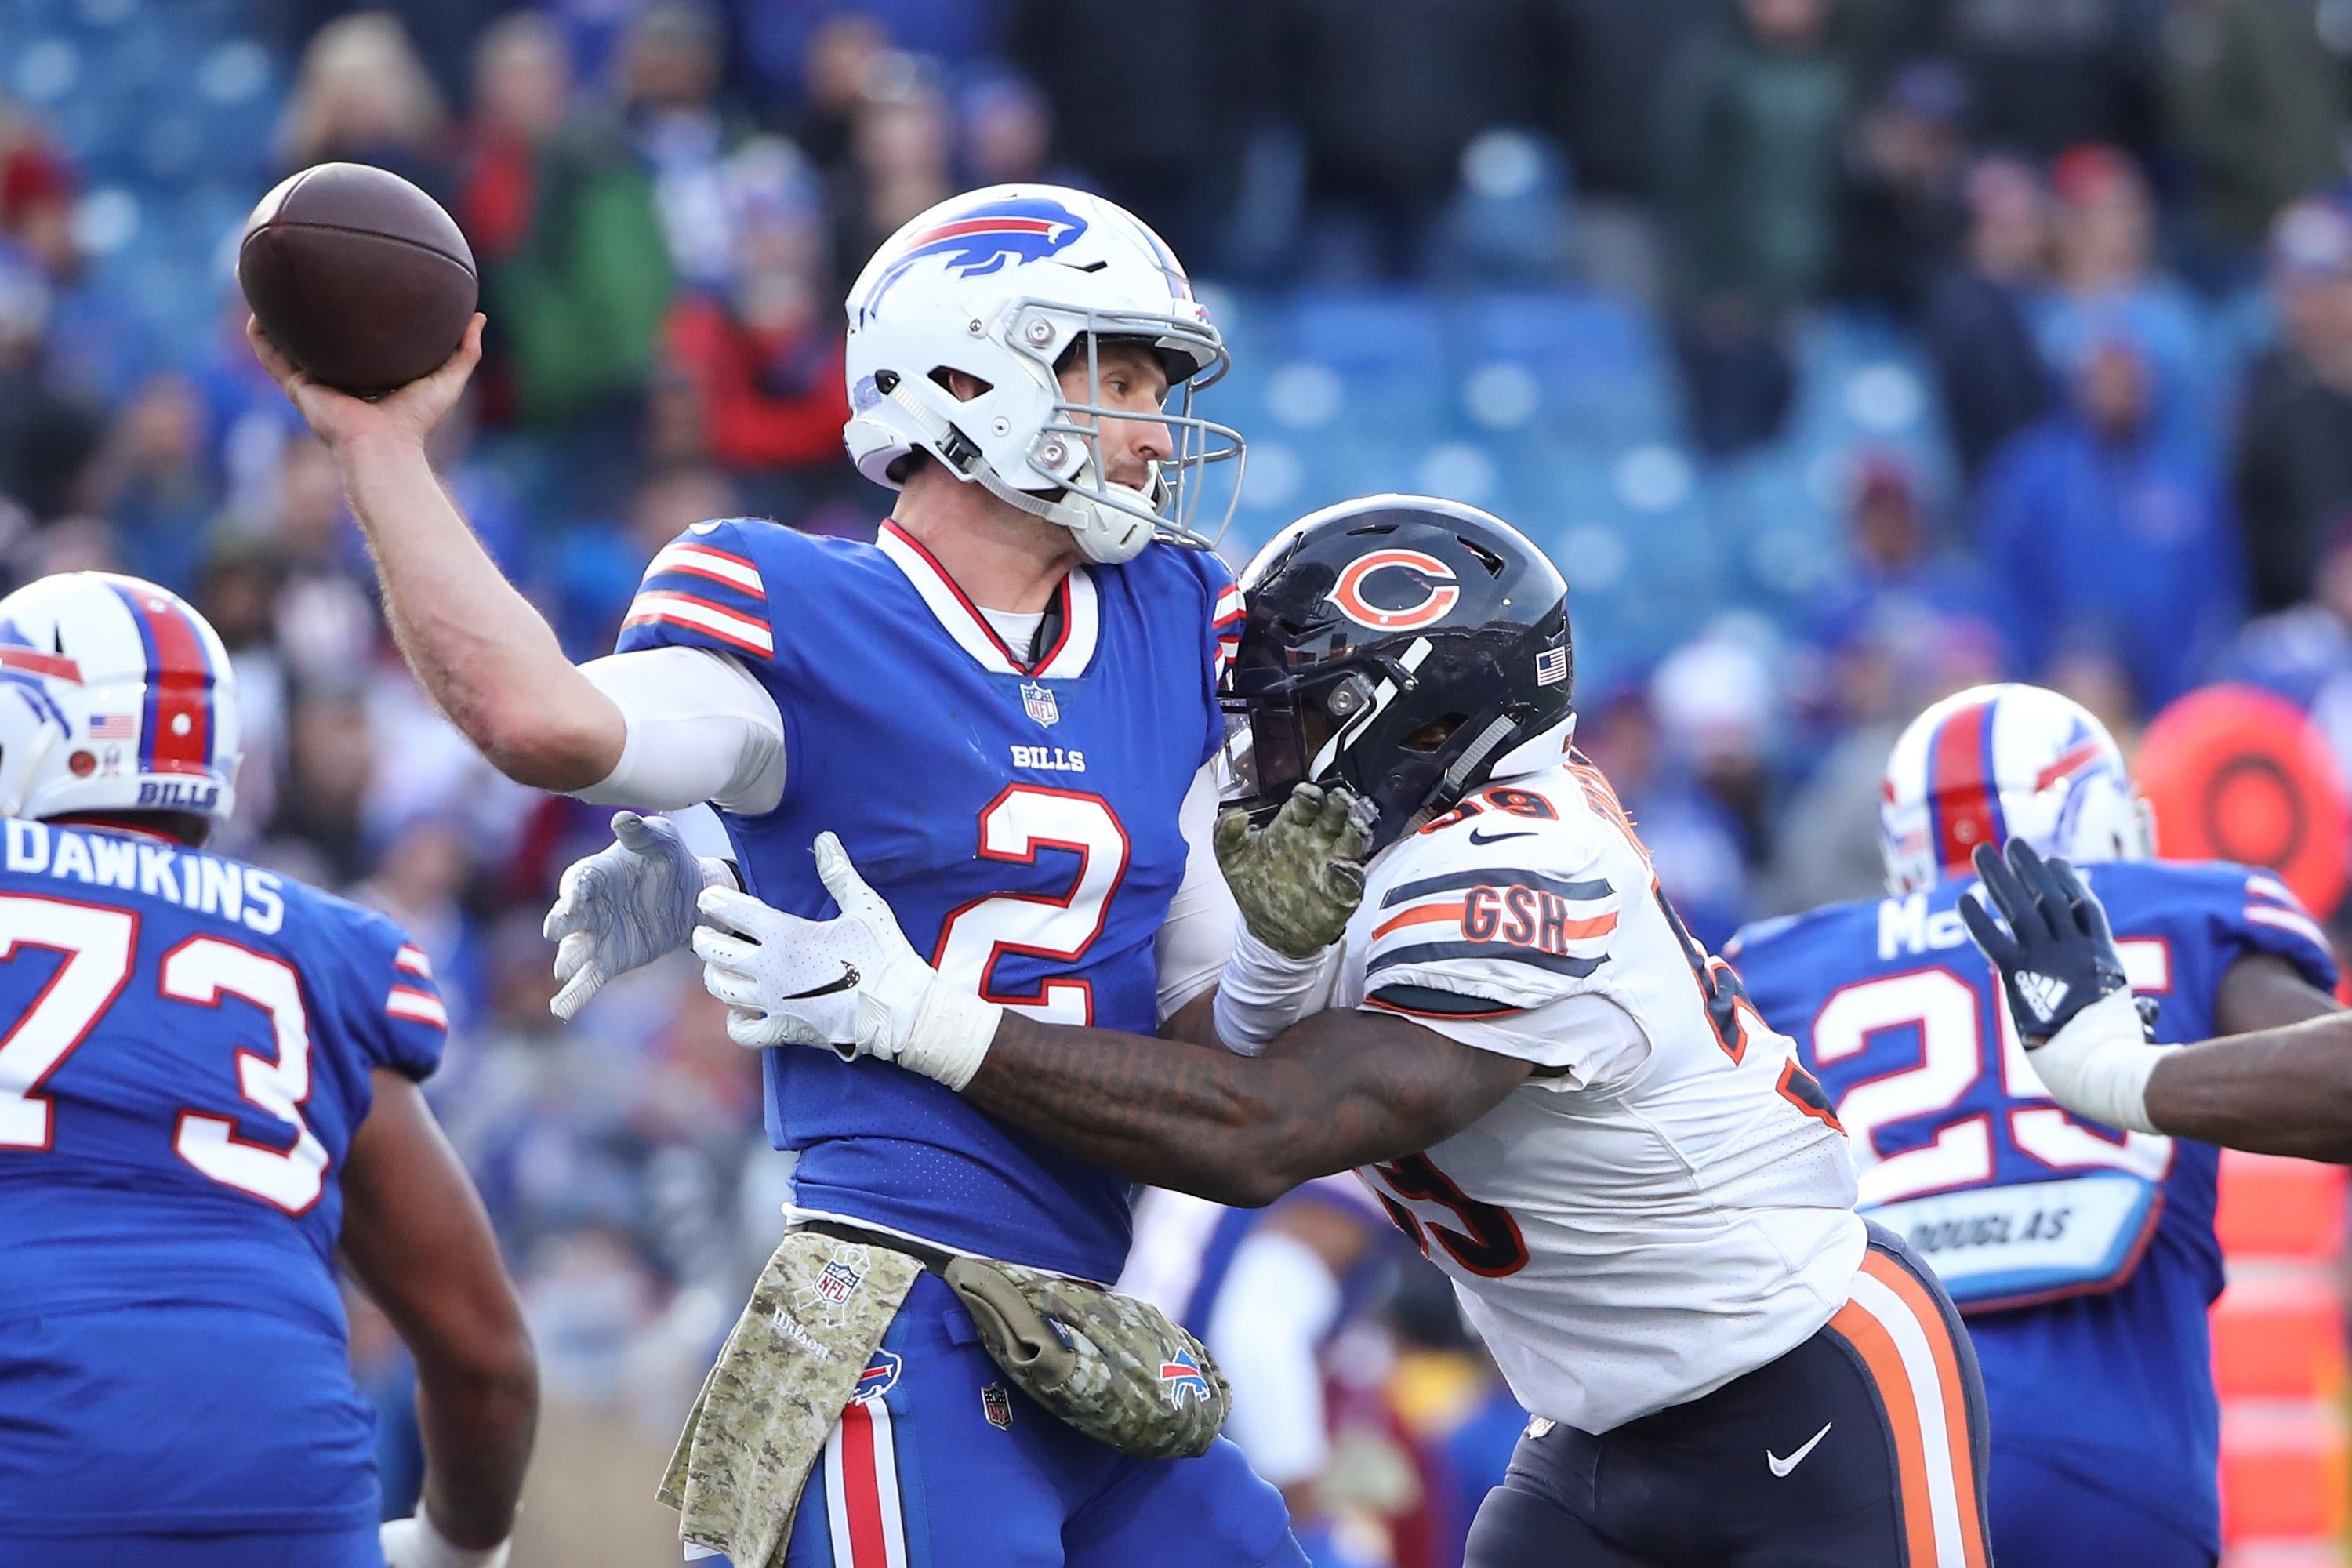 BUFFALO, NY - NOVEMBER 04: Nathan Peterman #2 of the Buffalo Bills is hit as he throws by Danny Trevathan #59 of the Chicago Bears in the fourth quarter during NFL game action at New Era Field on November 4, 2018 in Buffalo, New York. (Photo by Tom Szczerbowski/Getty Images)